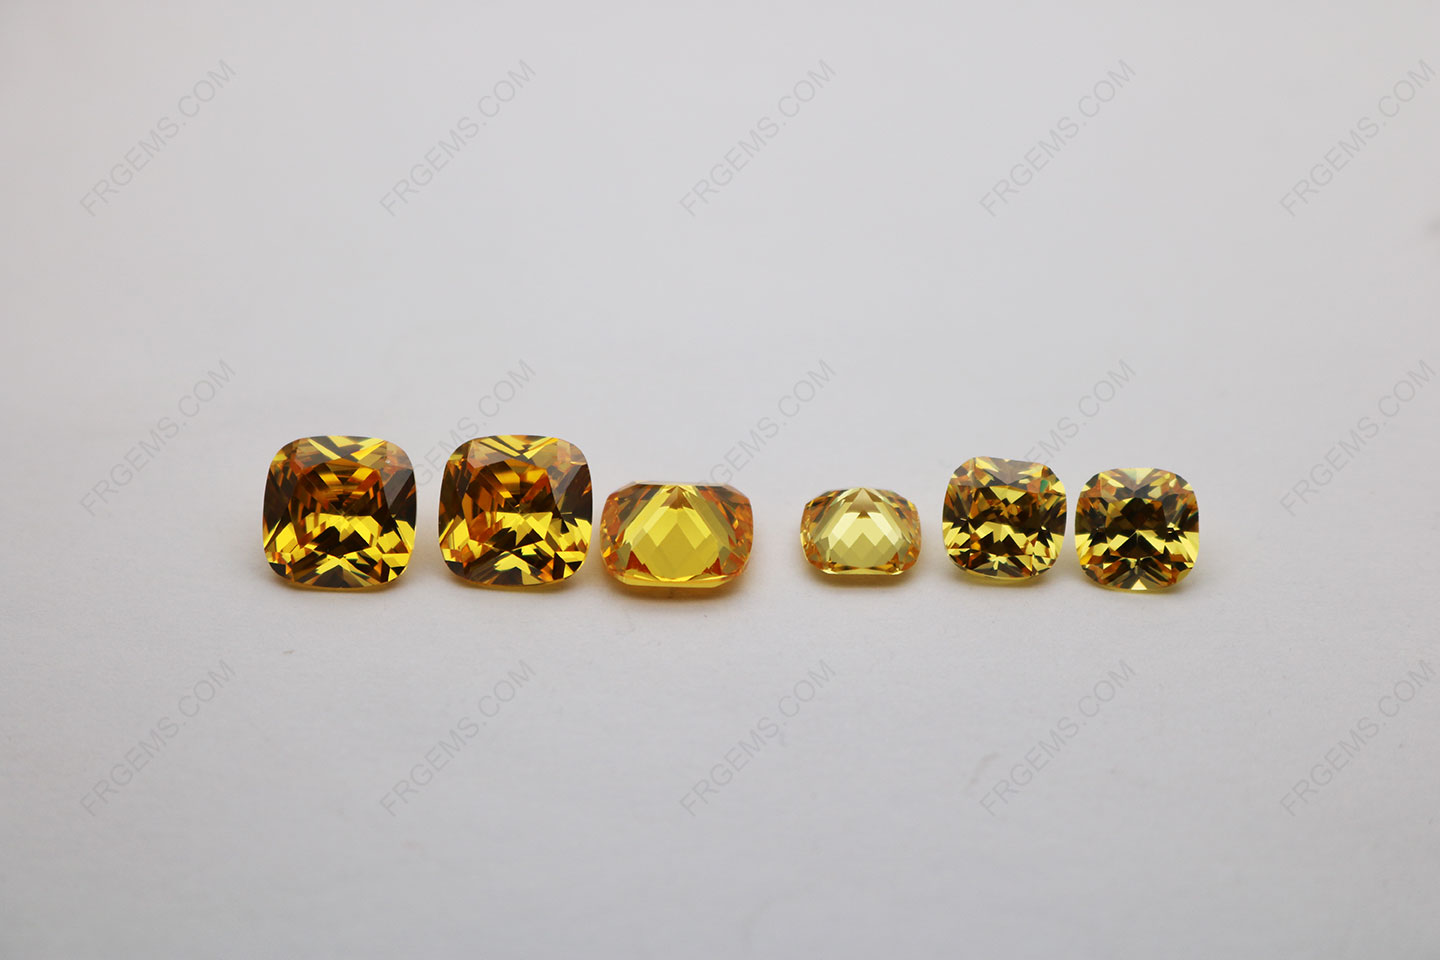 Cubic zirconia golden yellow light color shade cushion cut 10x10mm and 8x8mm gemstones IMG_5365